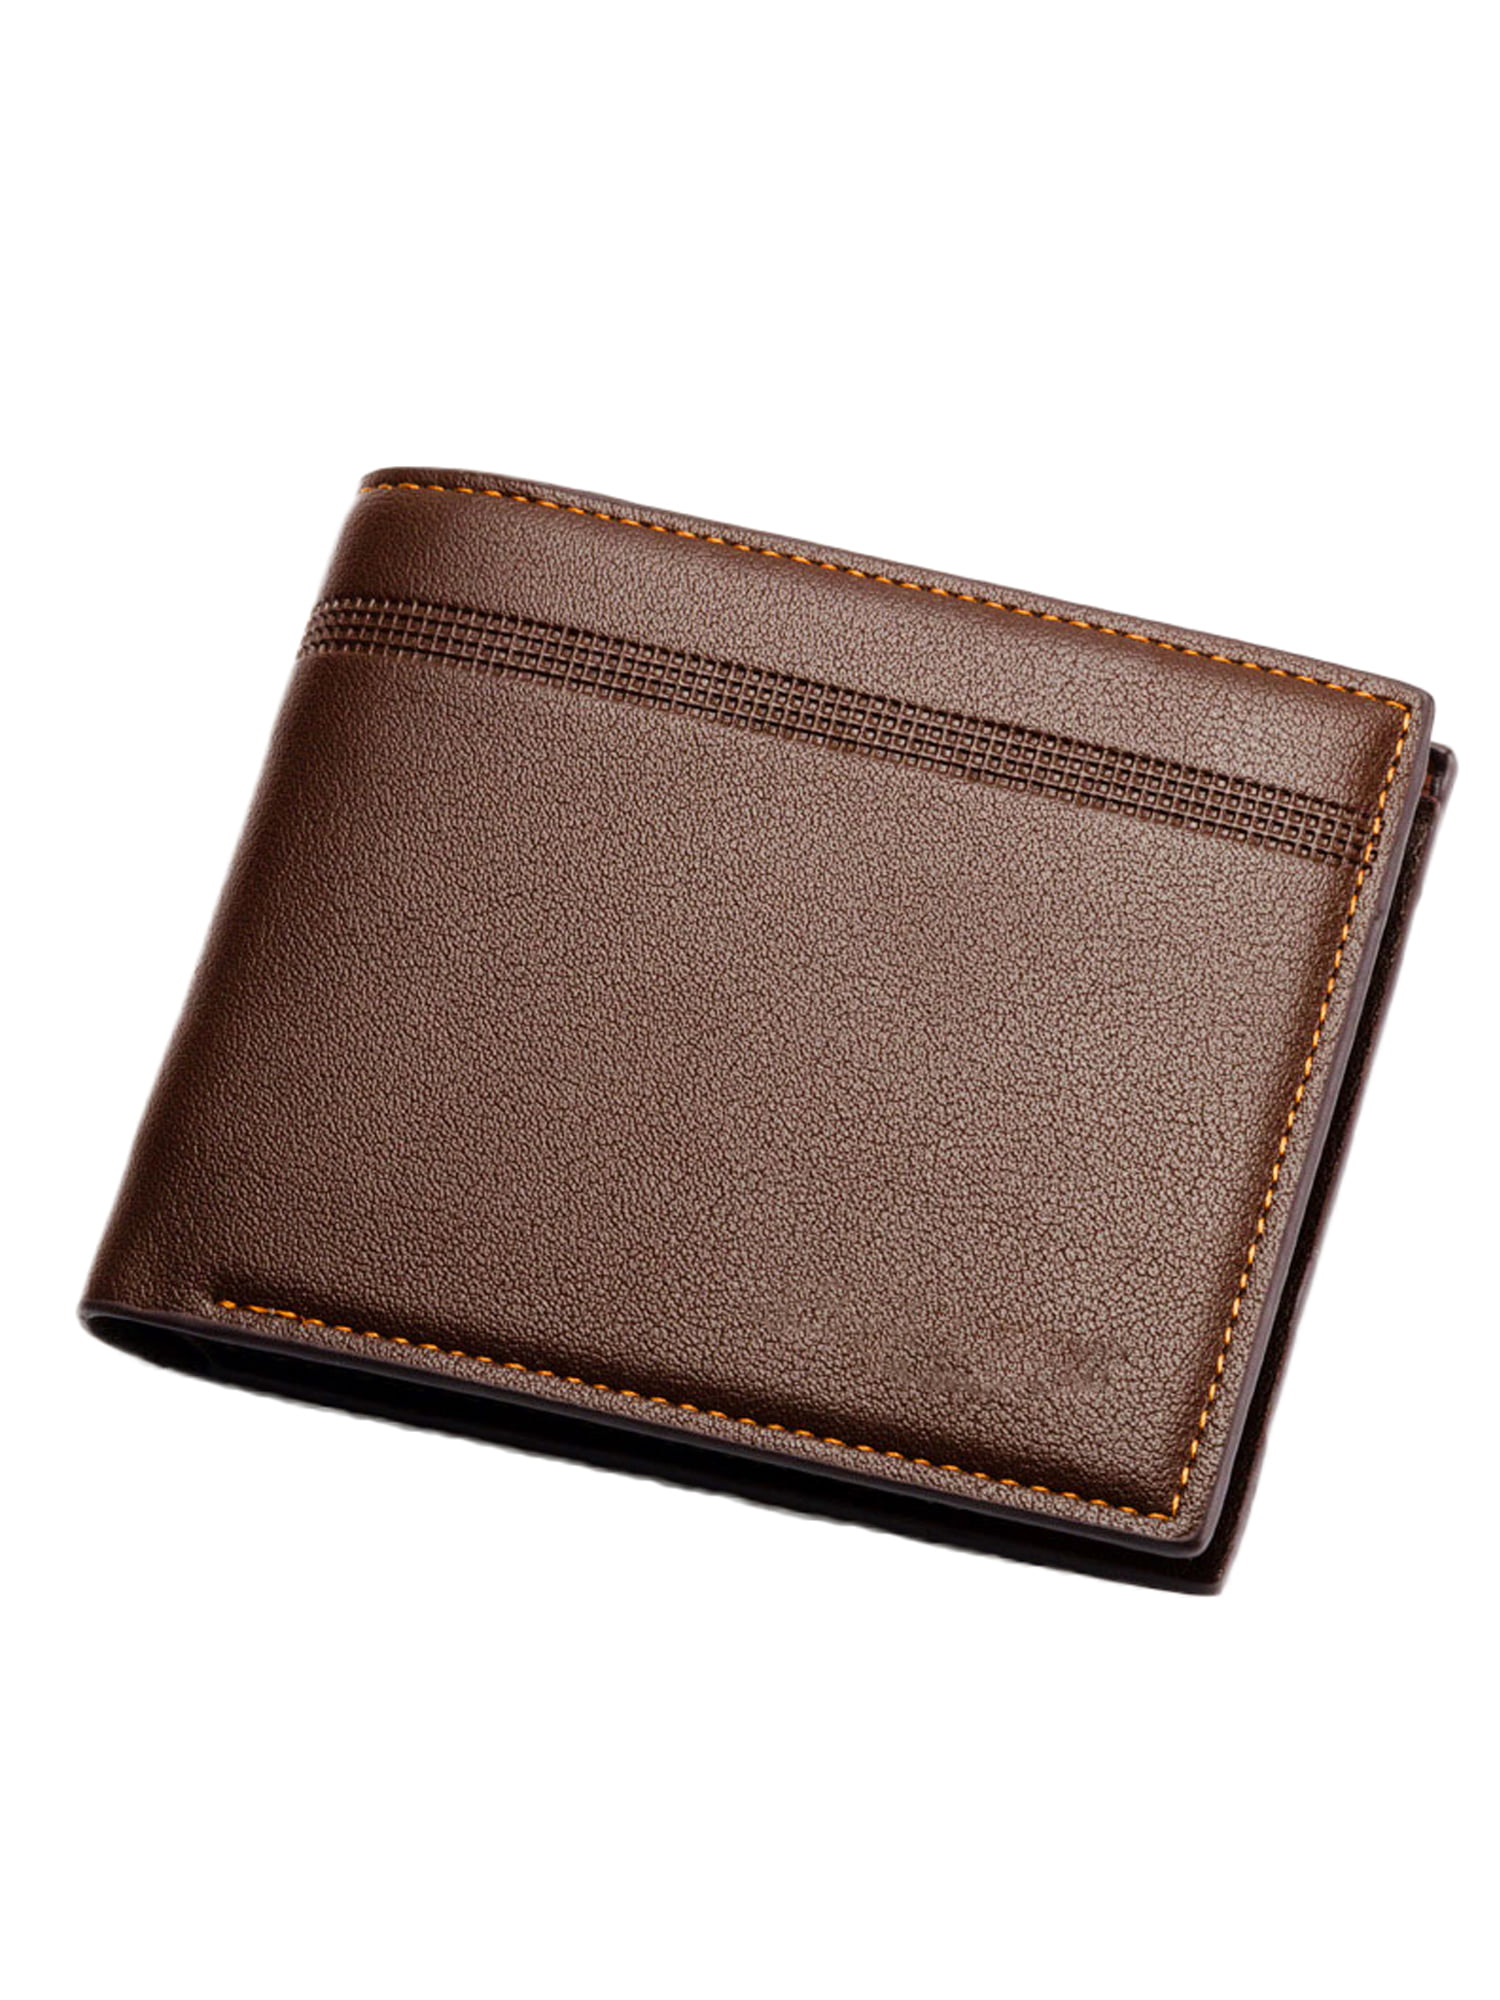 TheRang Men Bifold Blocking Short Leather Wallet Multi Card Holder Multifunction Purse With Coin Pocket